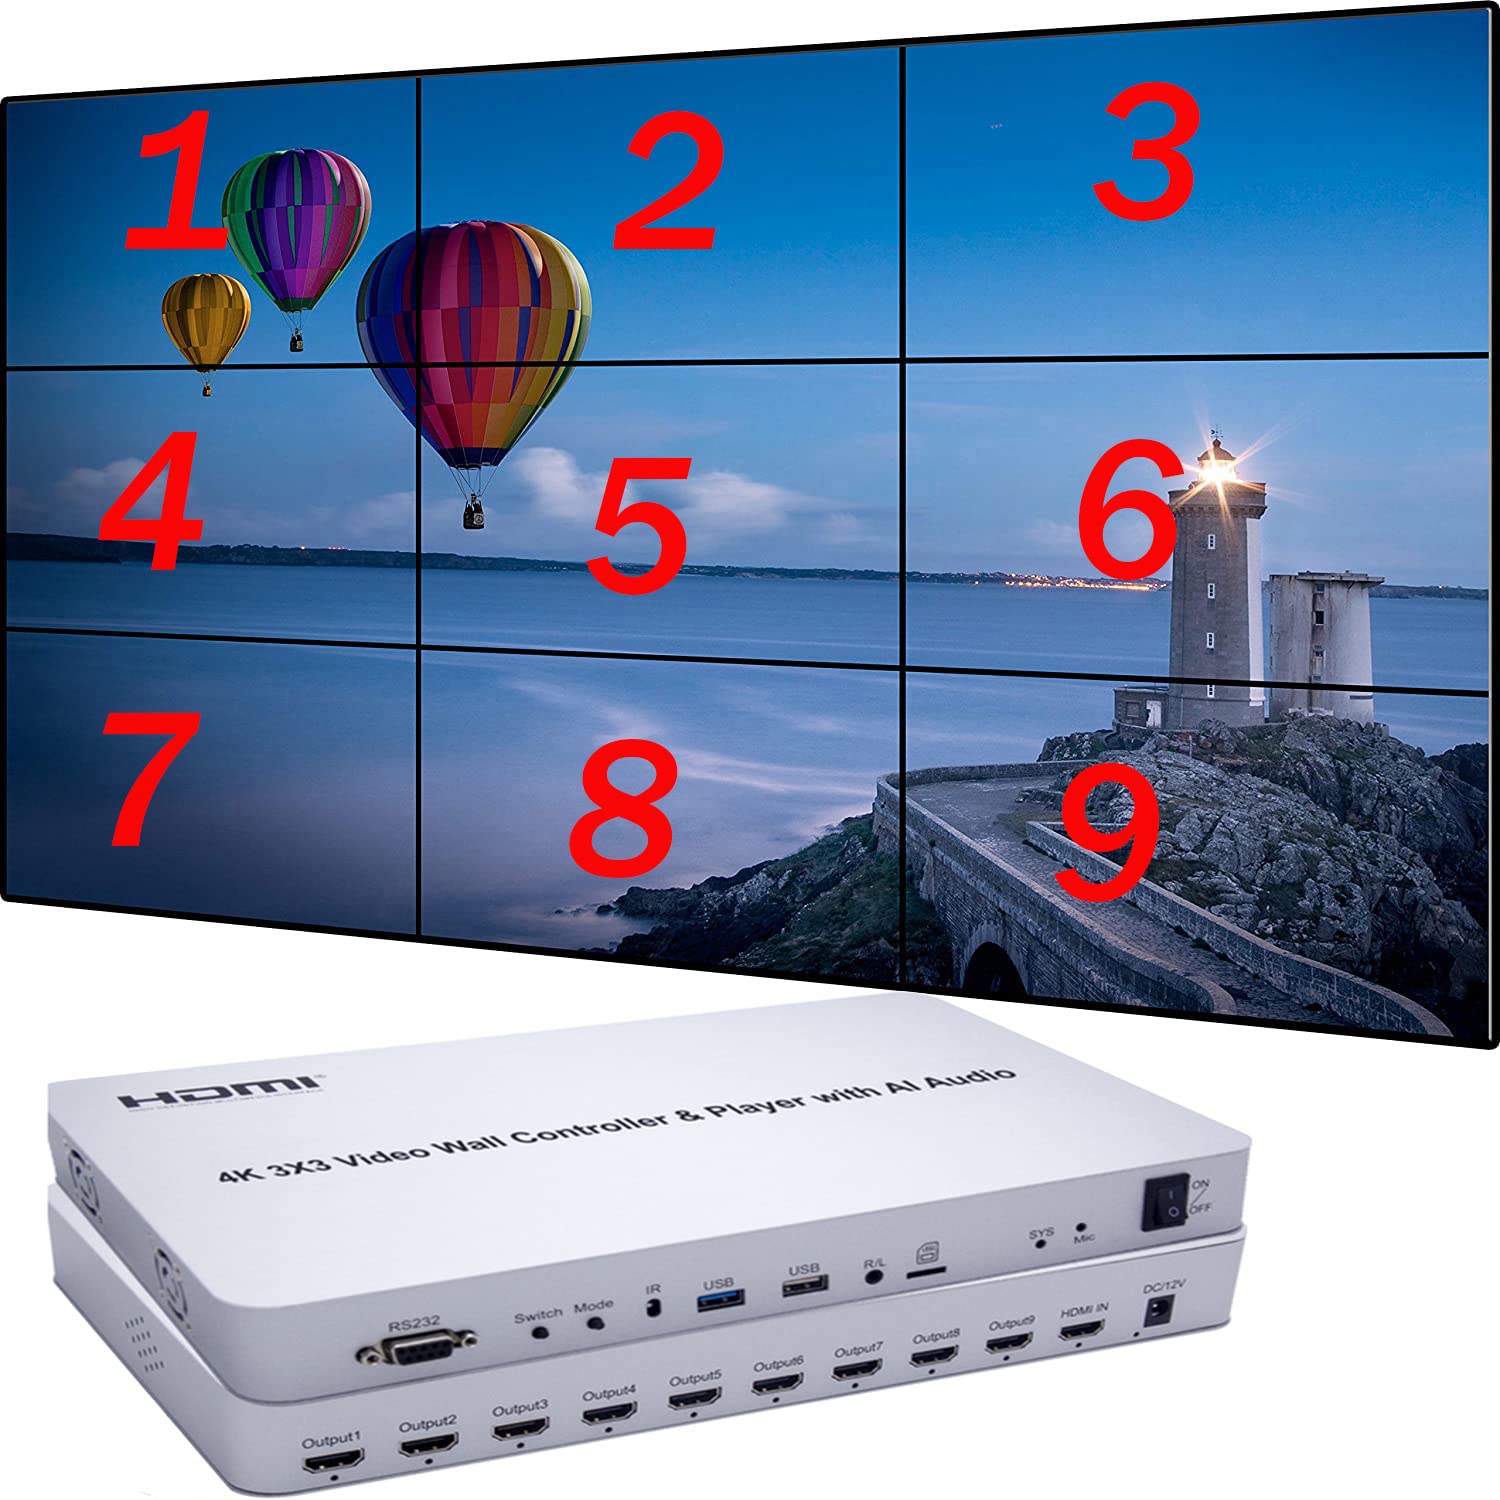 4K HDMI 3x3 Video Wall Controller with Media Player |9 Channels, HDMI 1.4, HDCP1.4 Compliant | 1 HDMI Input & 9 Outputs | 1x2, 1x3, 1x4, 2x1, 2x2, 2x3, 2x4, 3x1, 3x2, 3x3, 4x1, 4x2